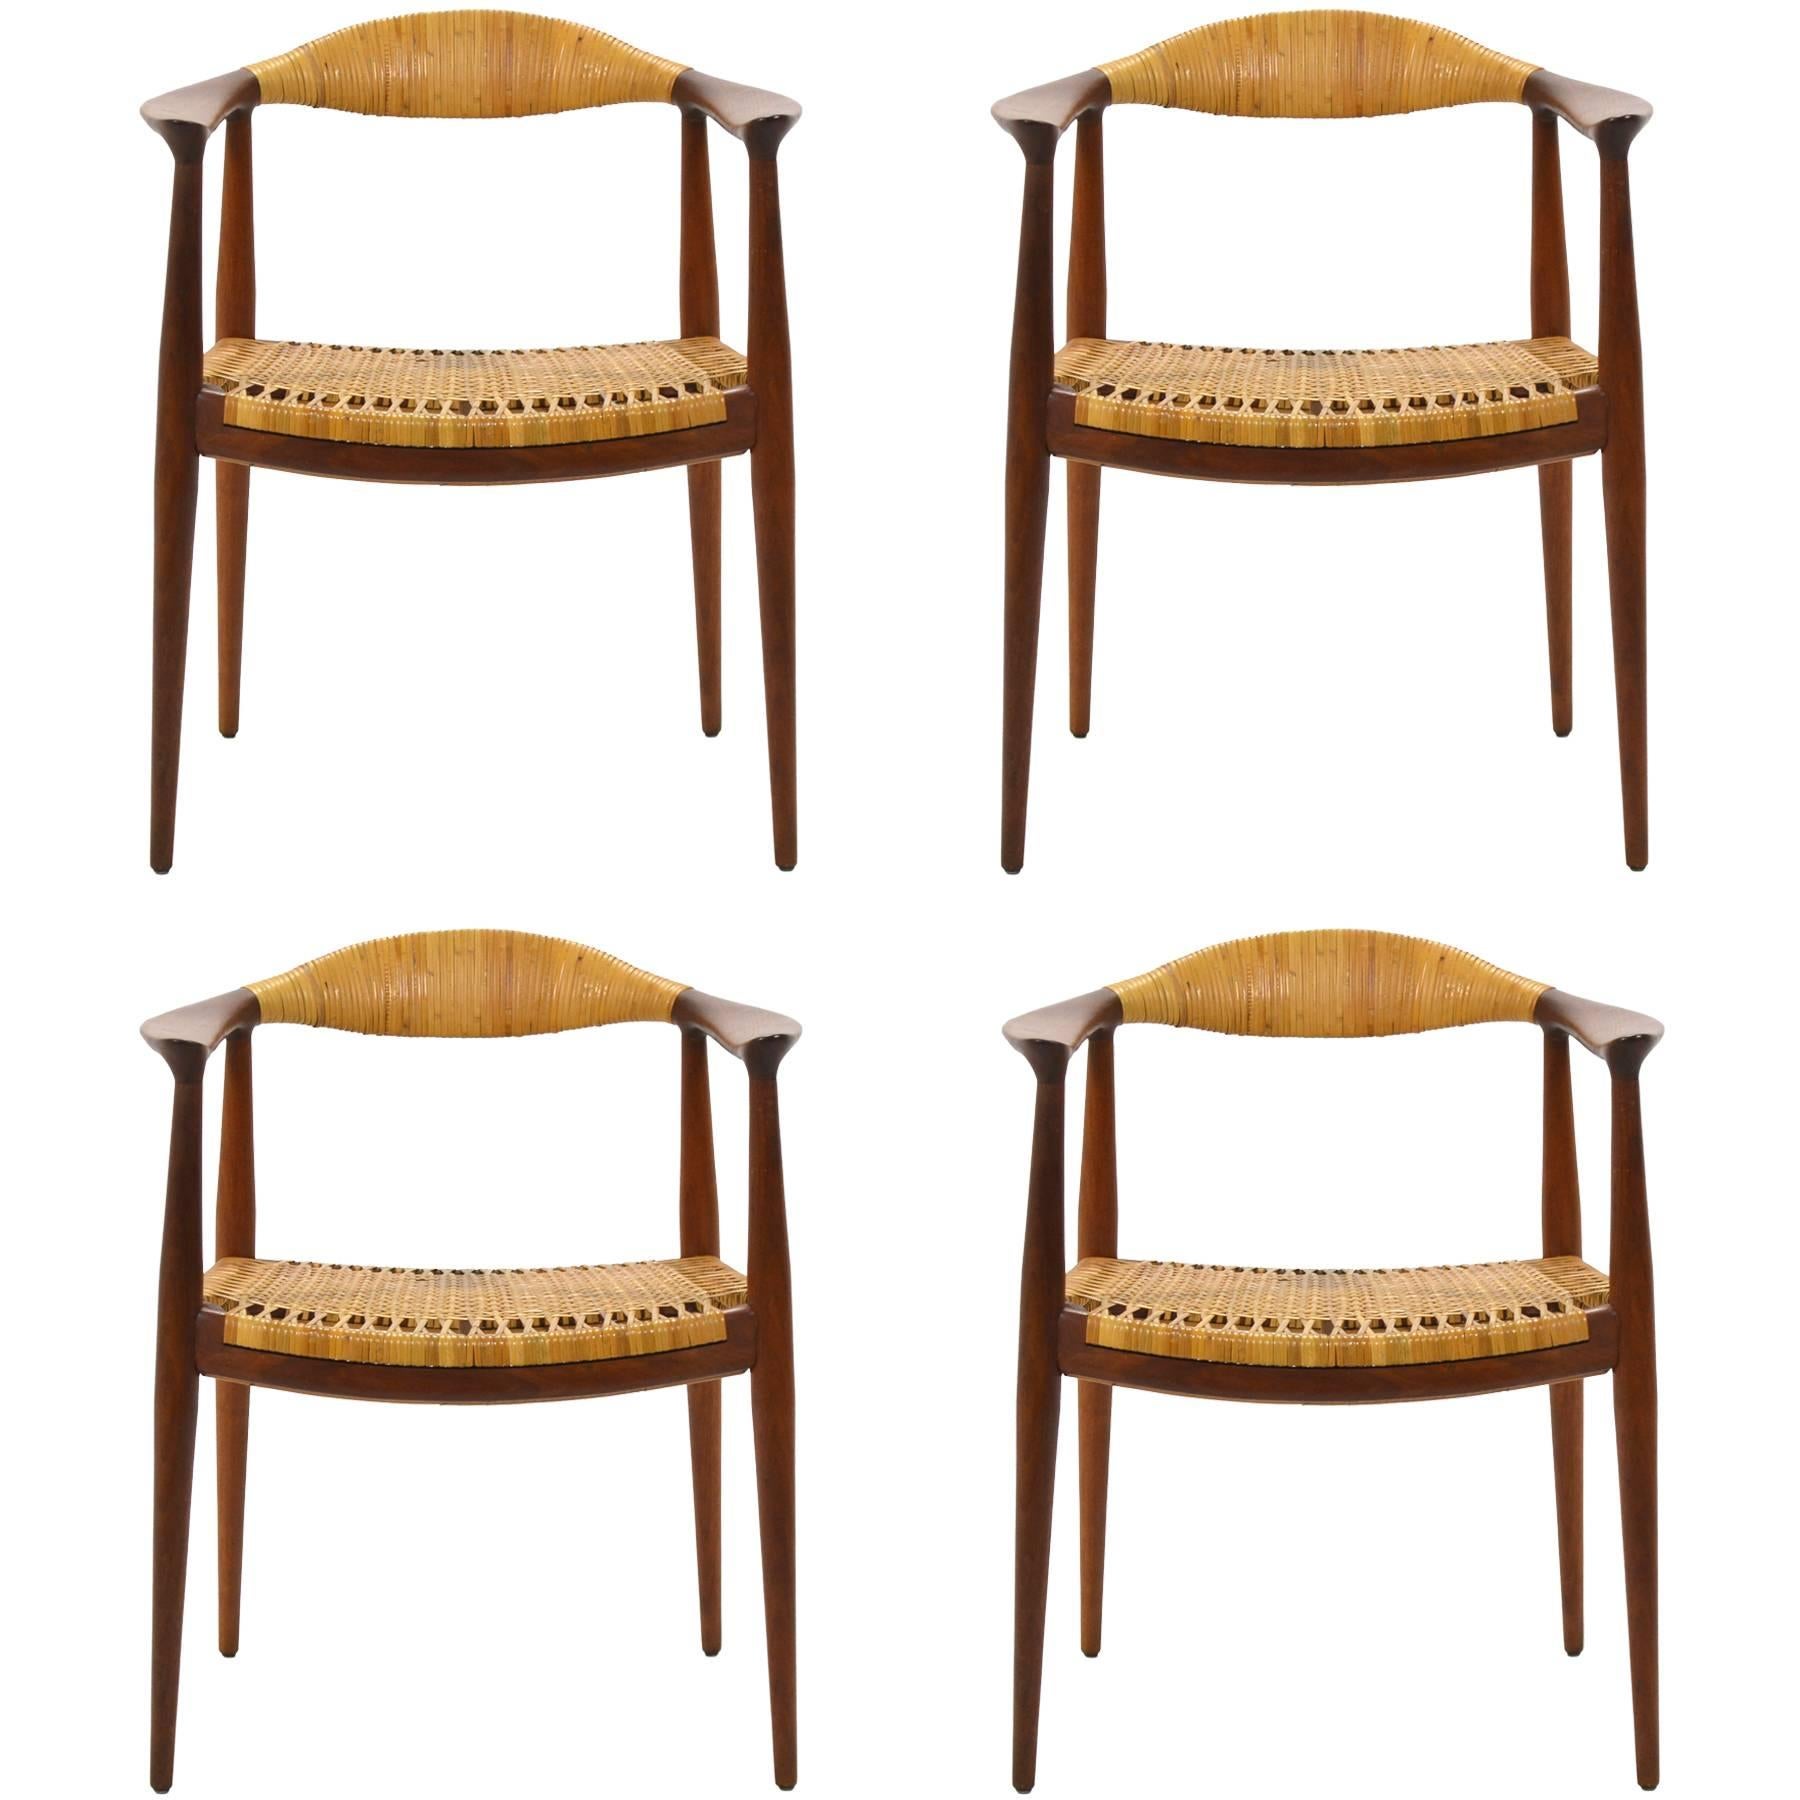 Set of Four Round or "The" Chairs